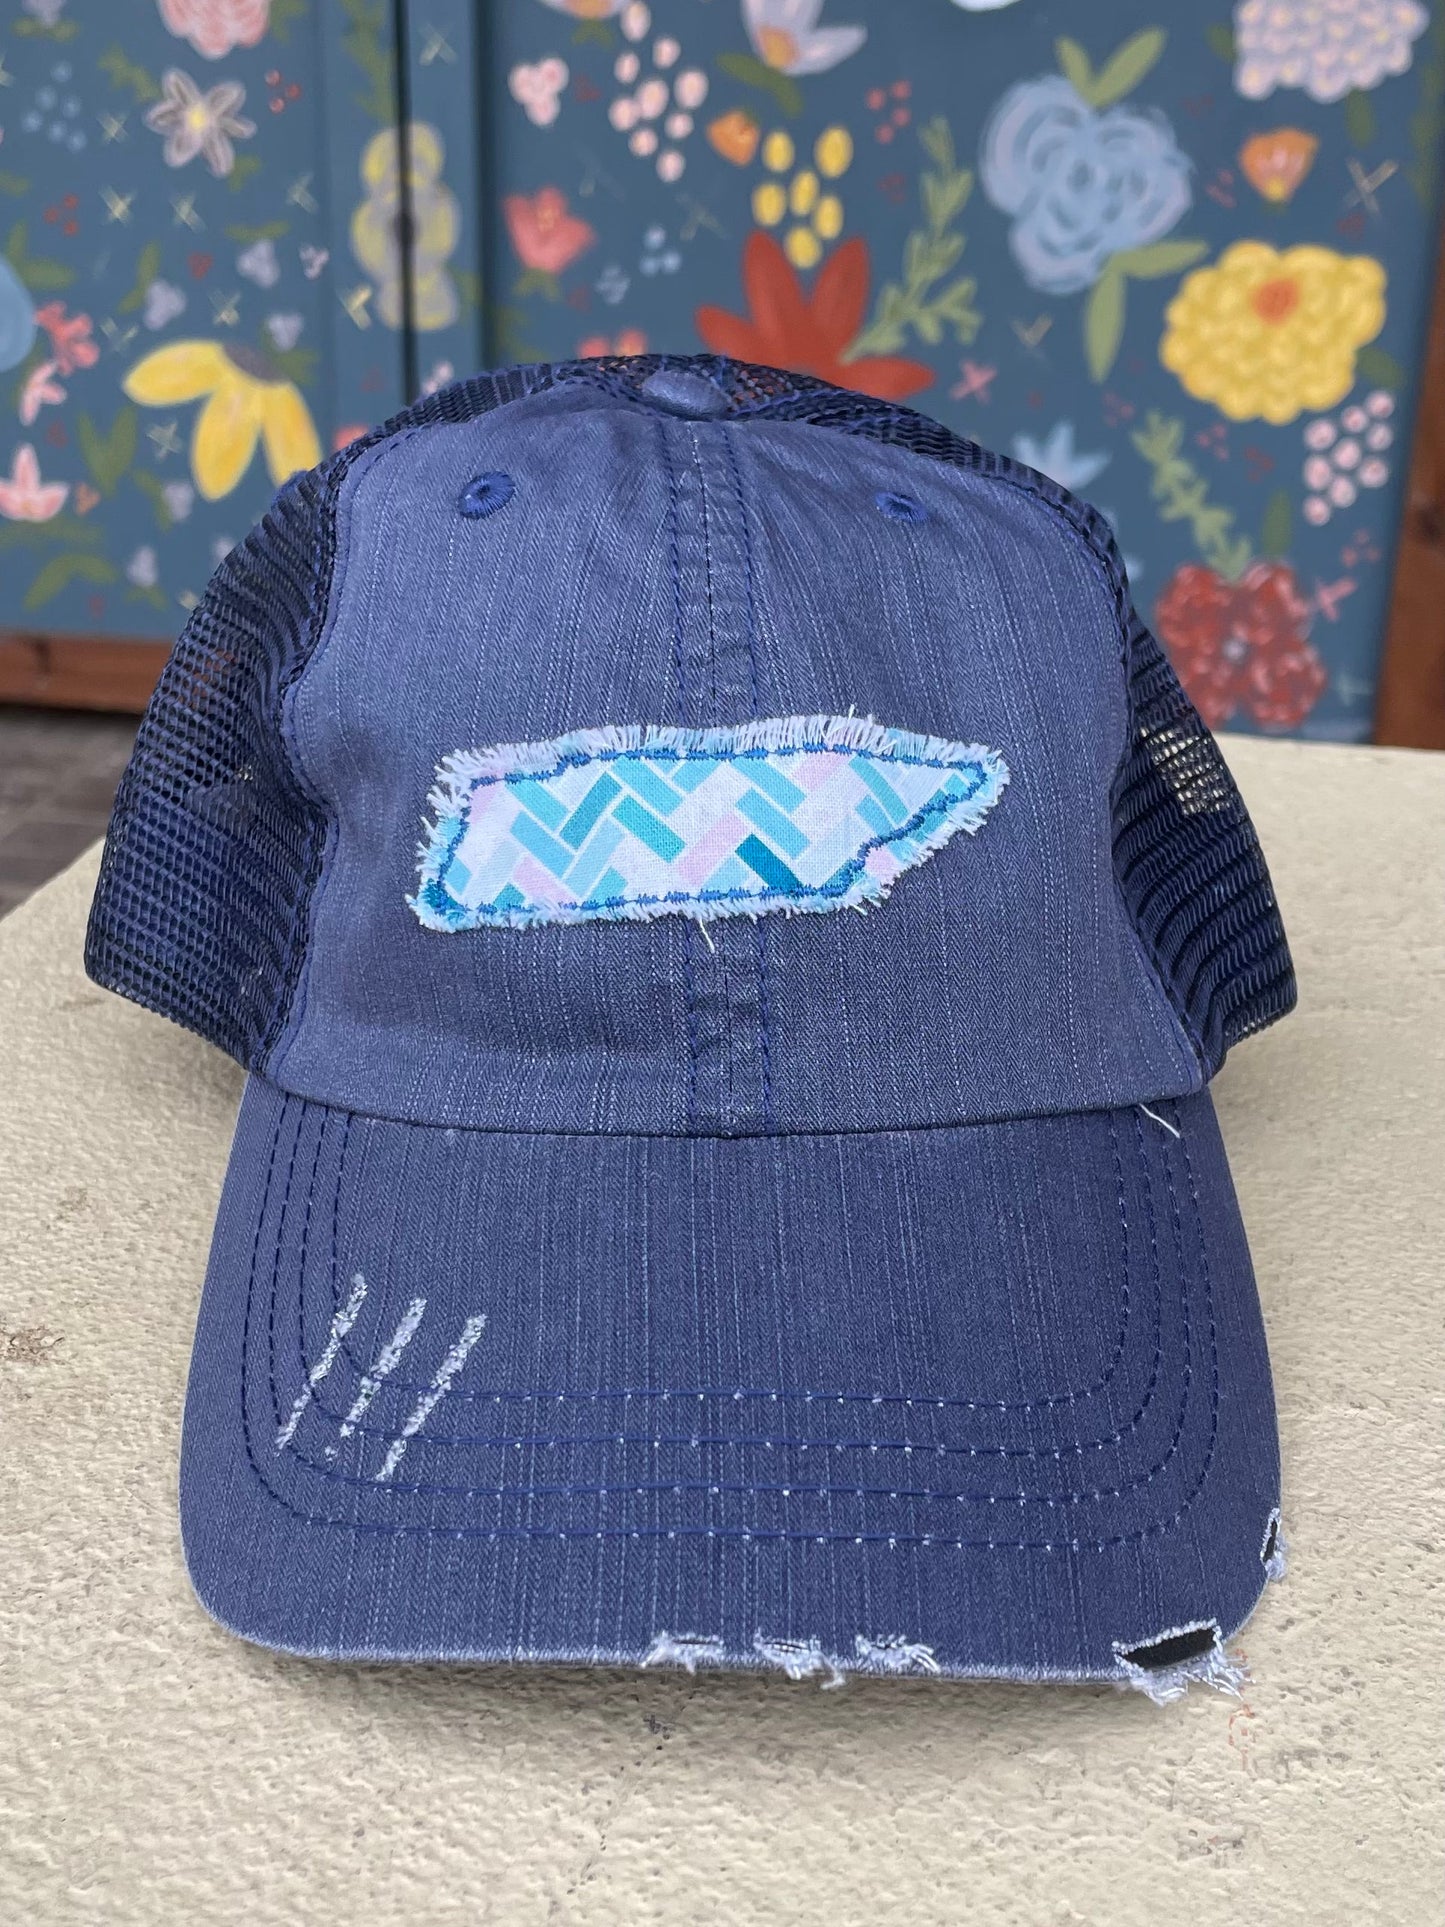 Tennessee Embroidered Emblem with Print Distressed Hat-Apparel > Apparel & Accessories > Clothing Accessories > Hats-Navy Hat with Chevron Print-Quinn's Mercantile